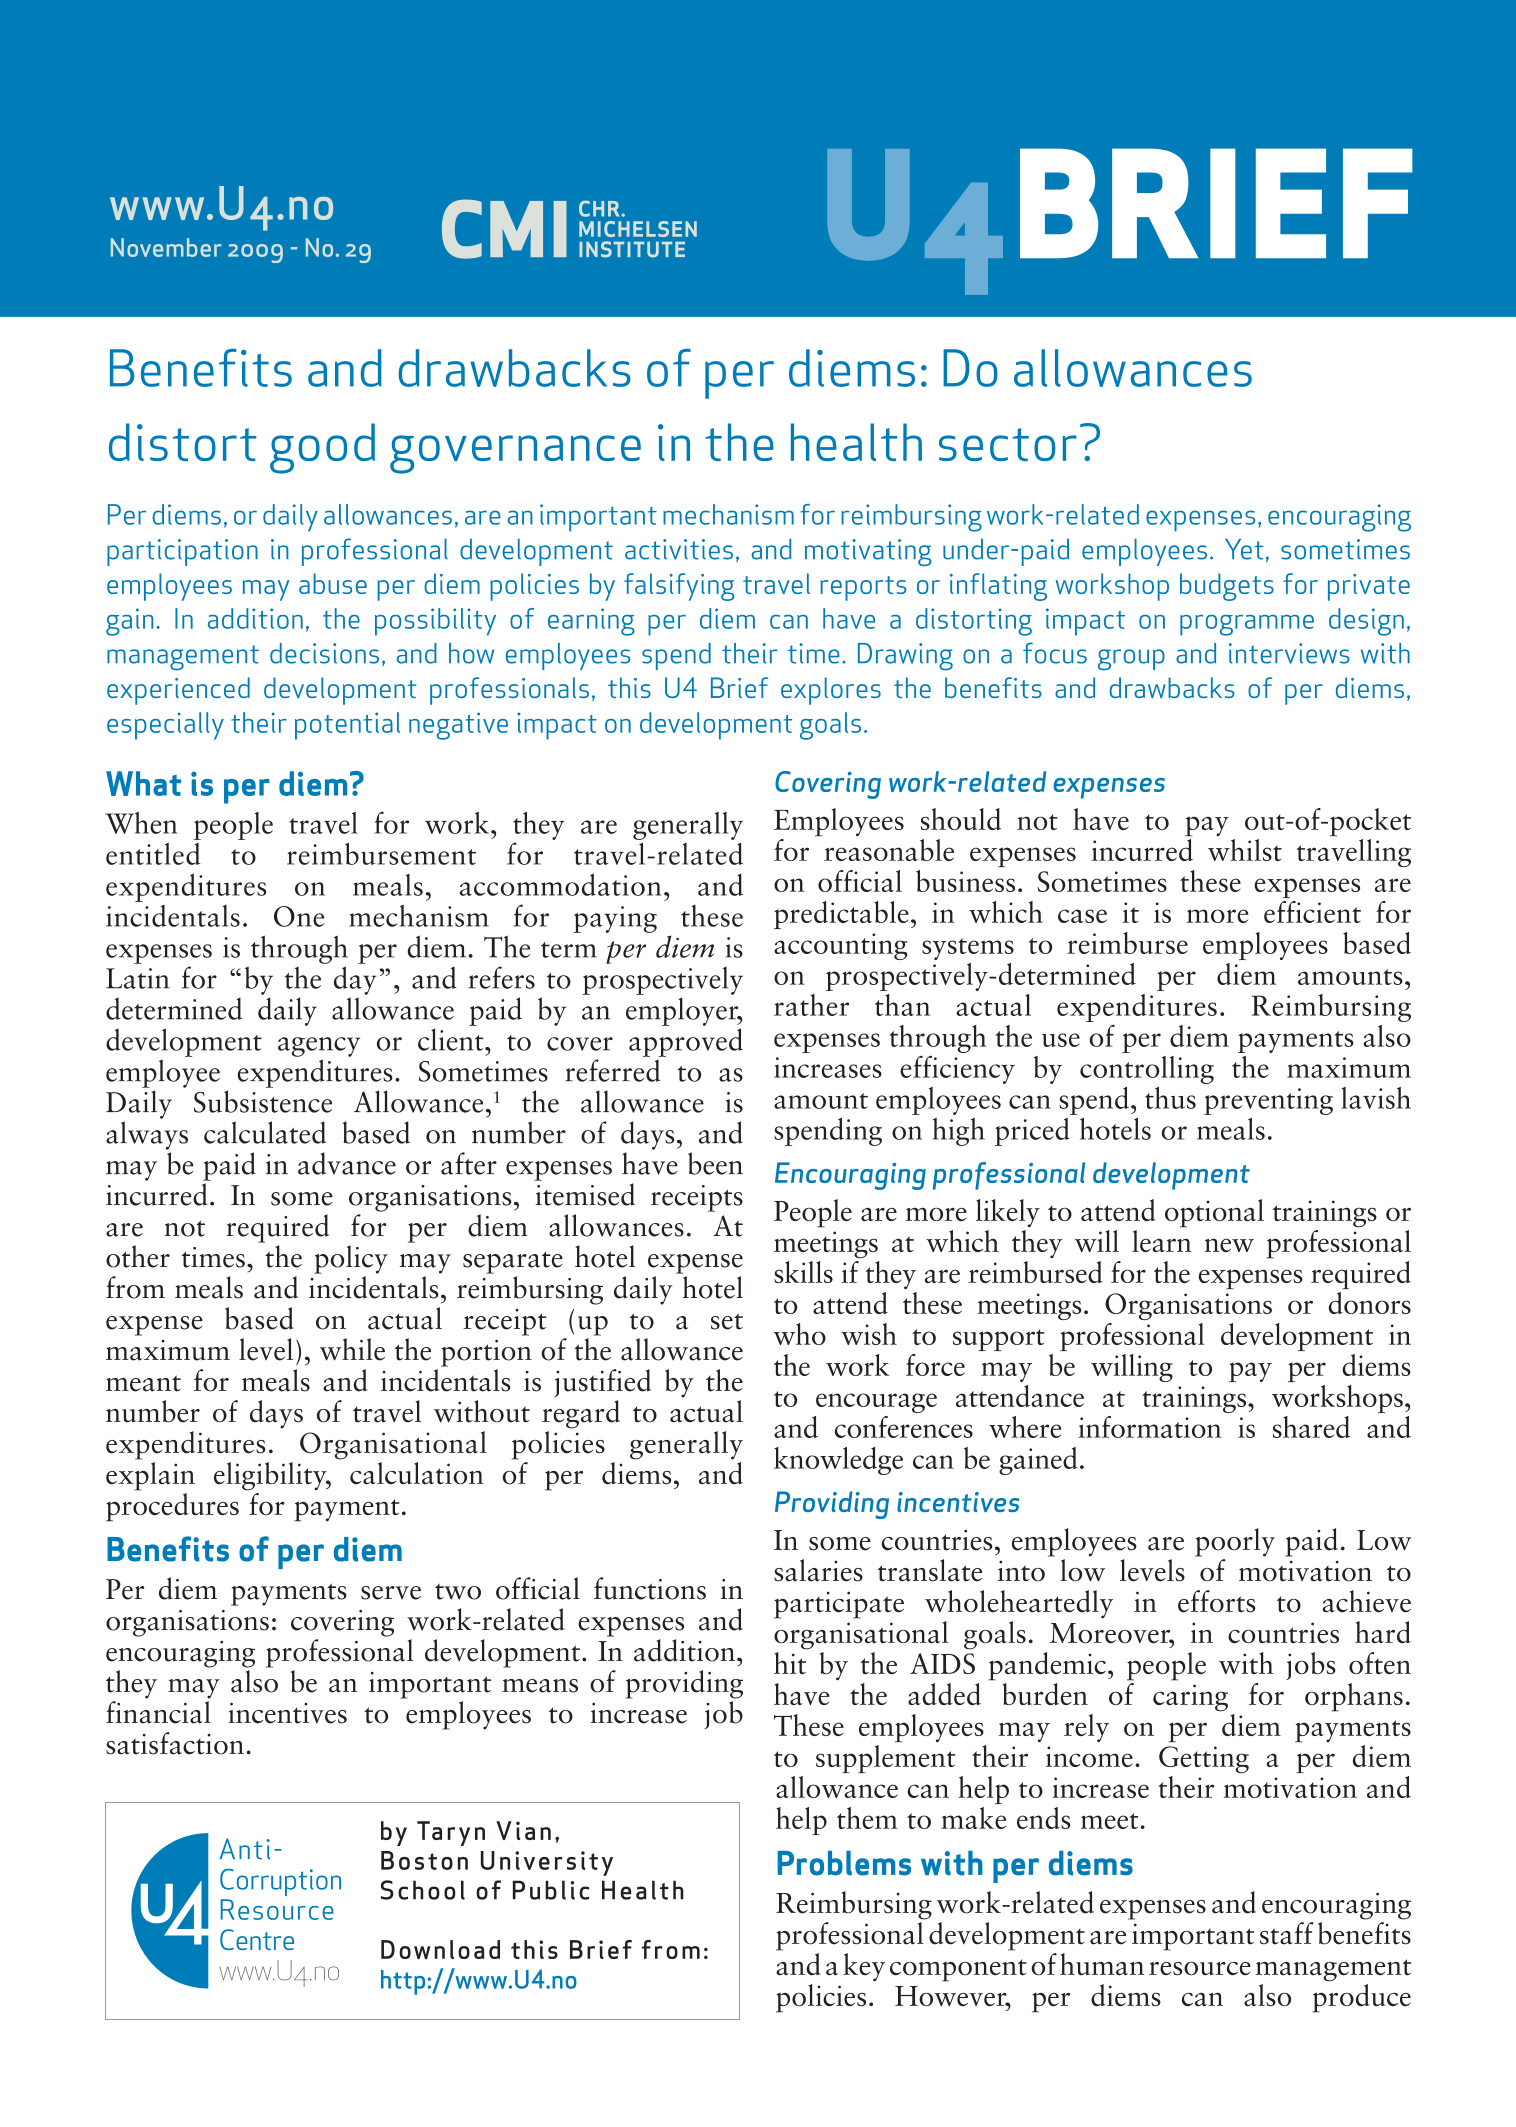 Benefits and drawbacks of per diems: Do allowances distort good governance in the health sector?